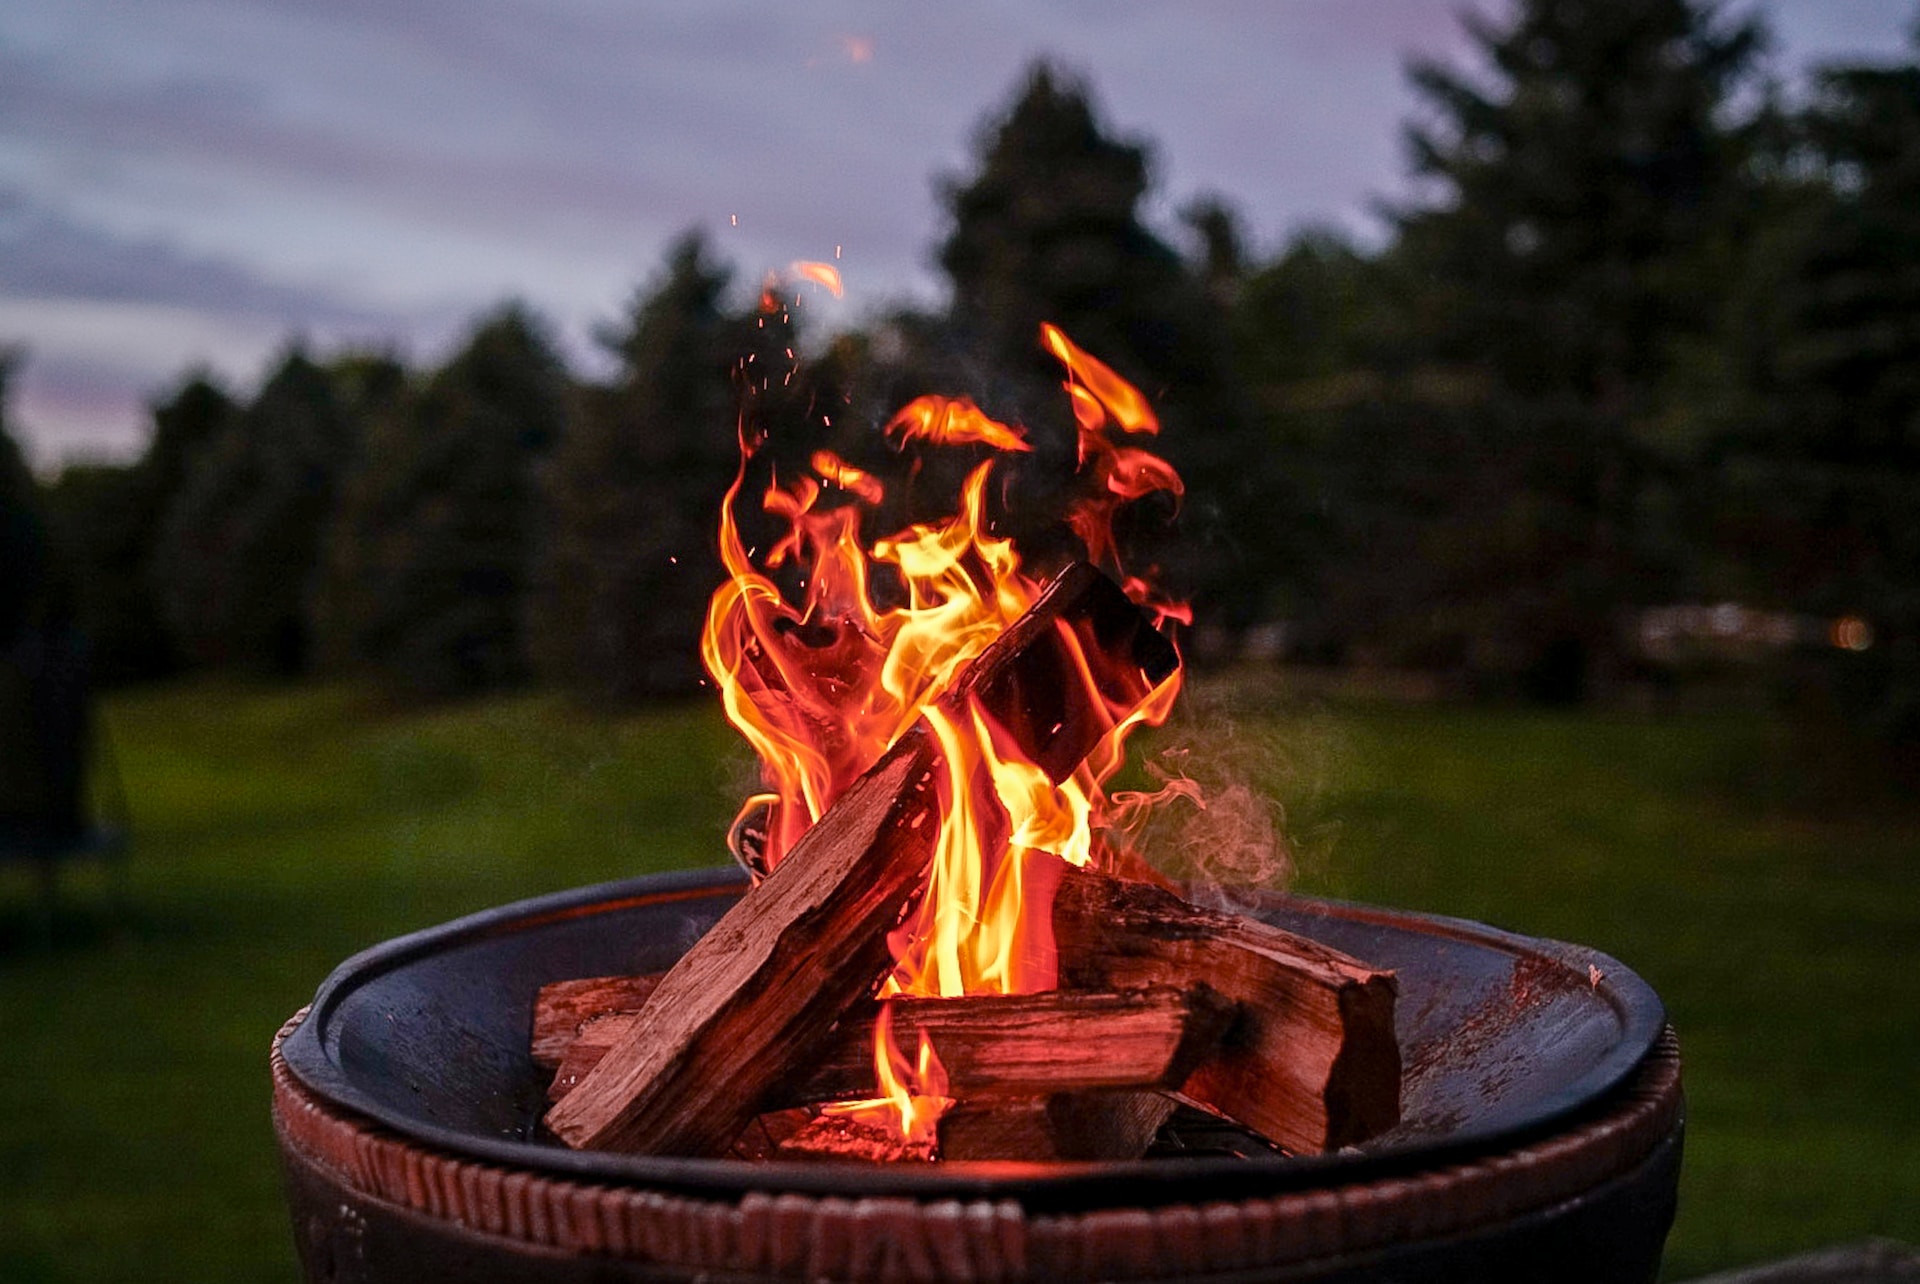 Flames rising from a fire pit outside at dusk.